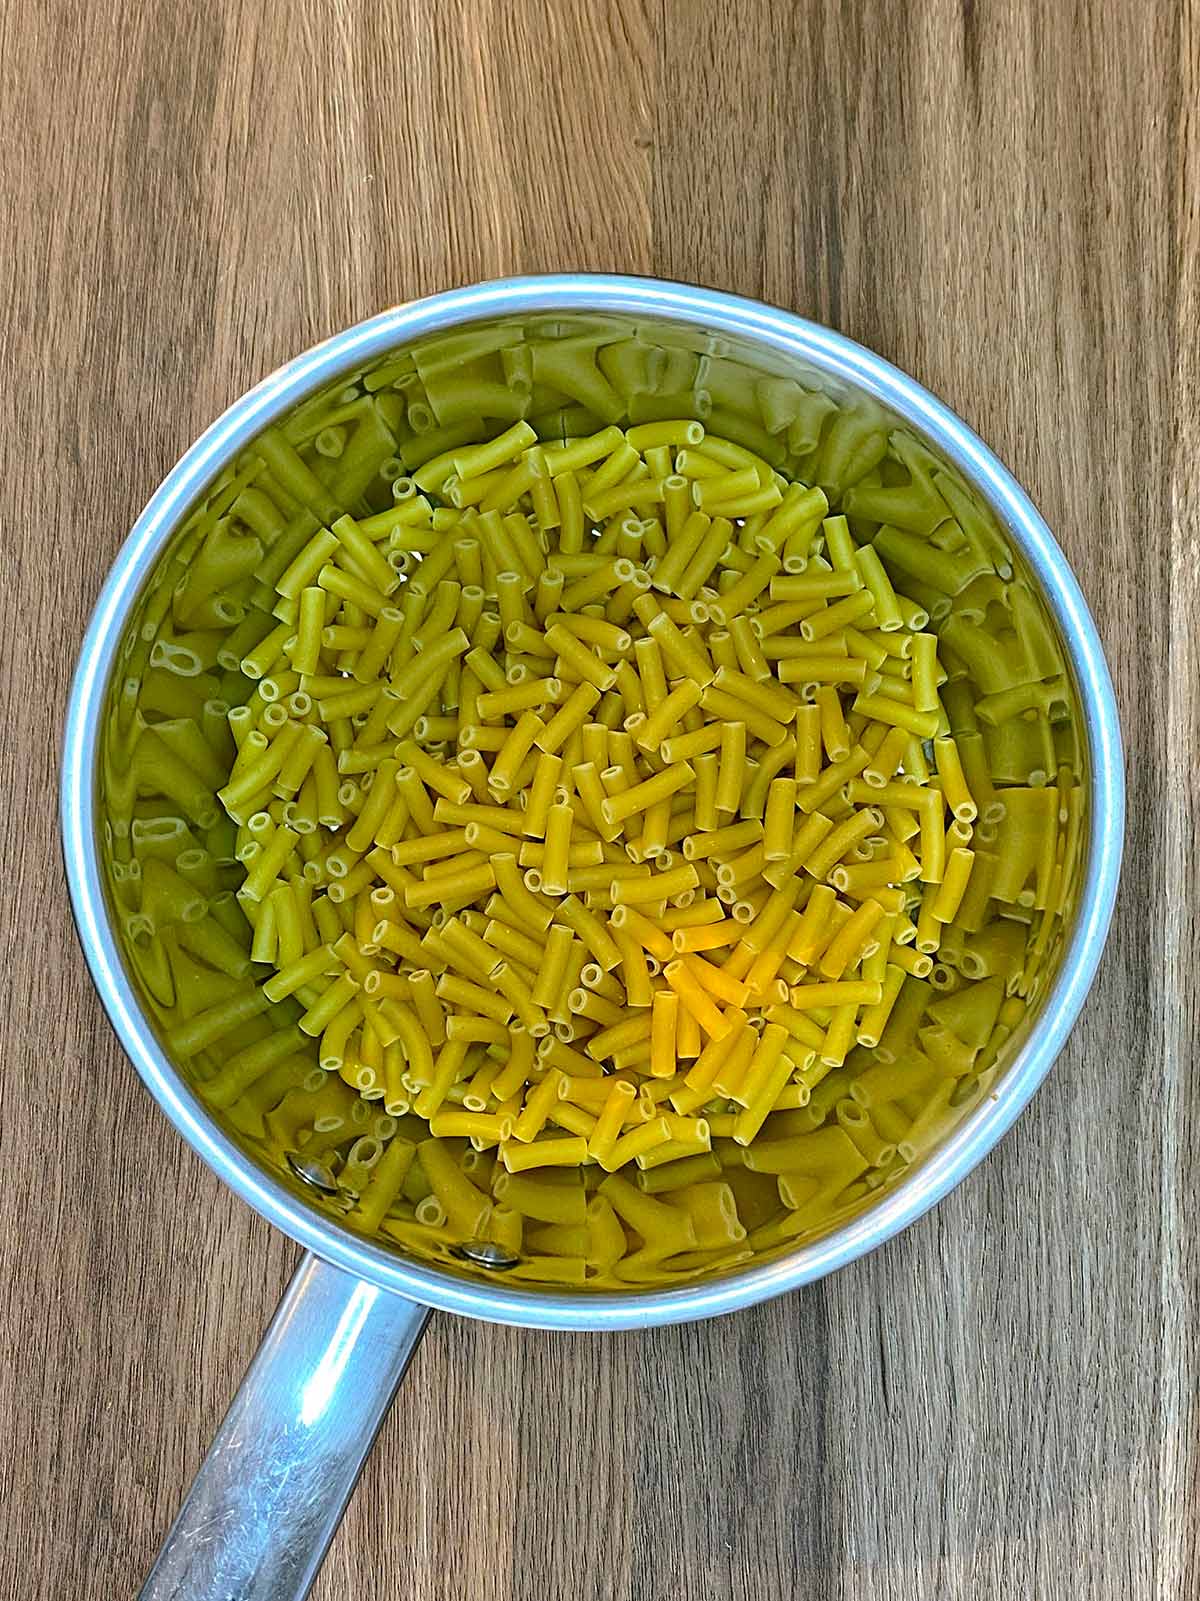 A saucepan containing uncooked macaroni.